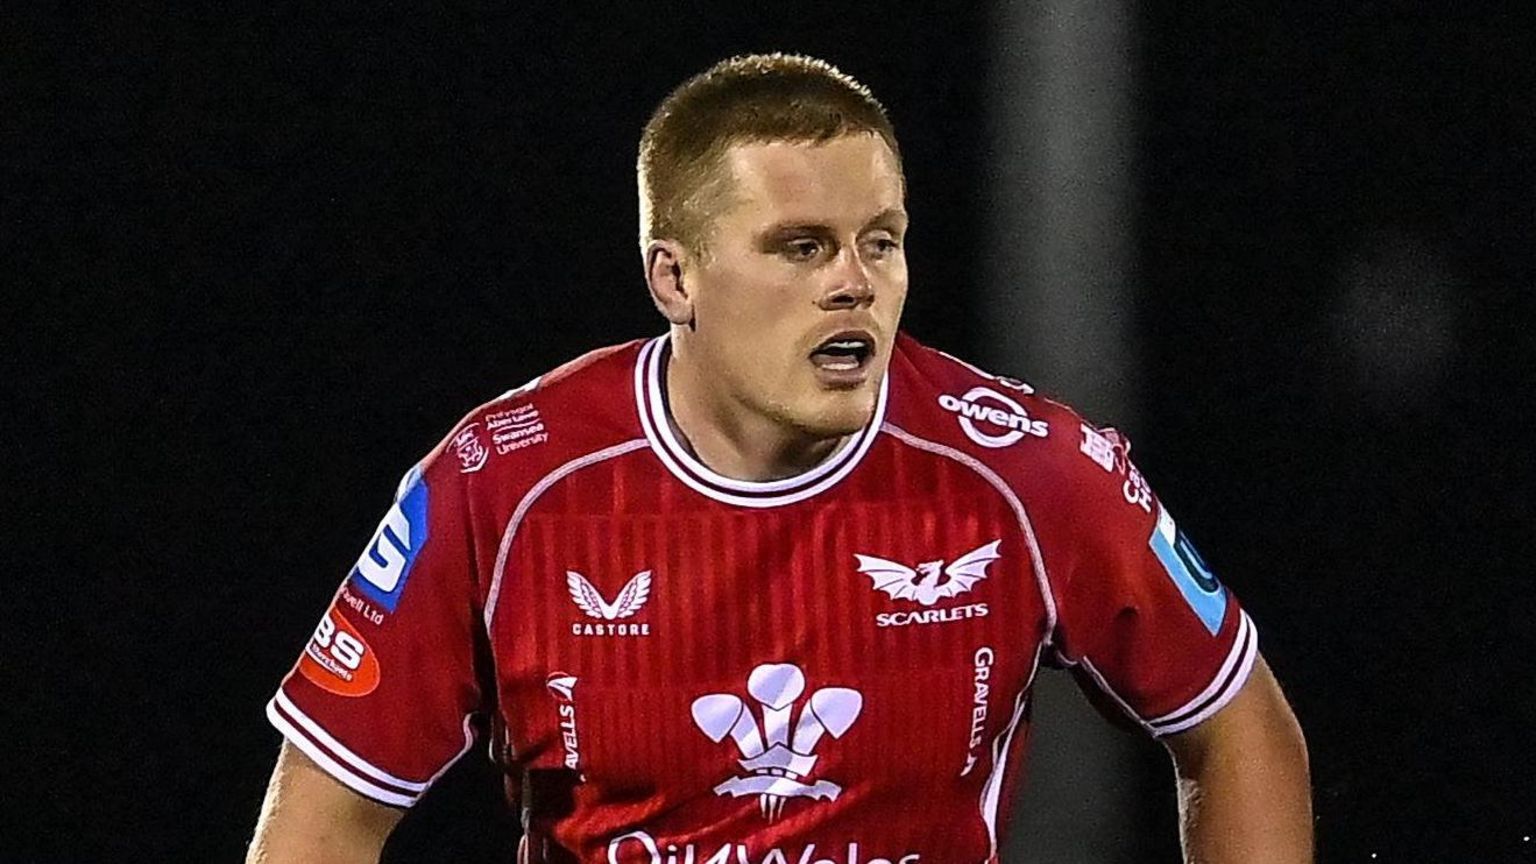 Dan Thomas had a spell on loan at Scarlets in 2022